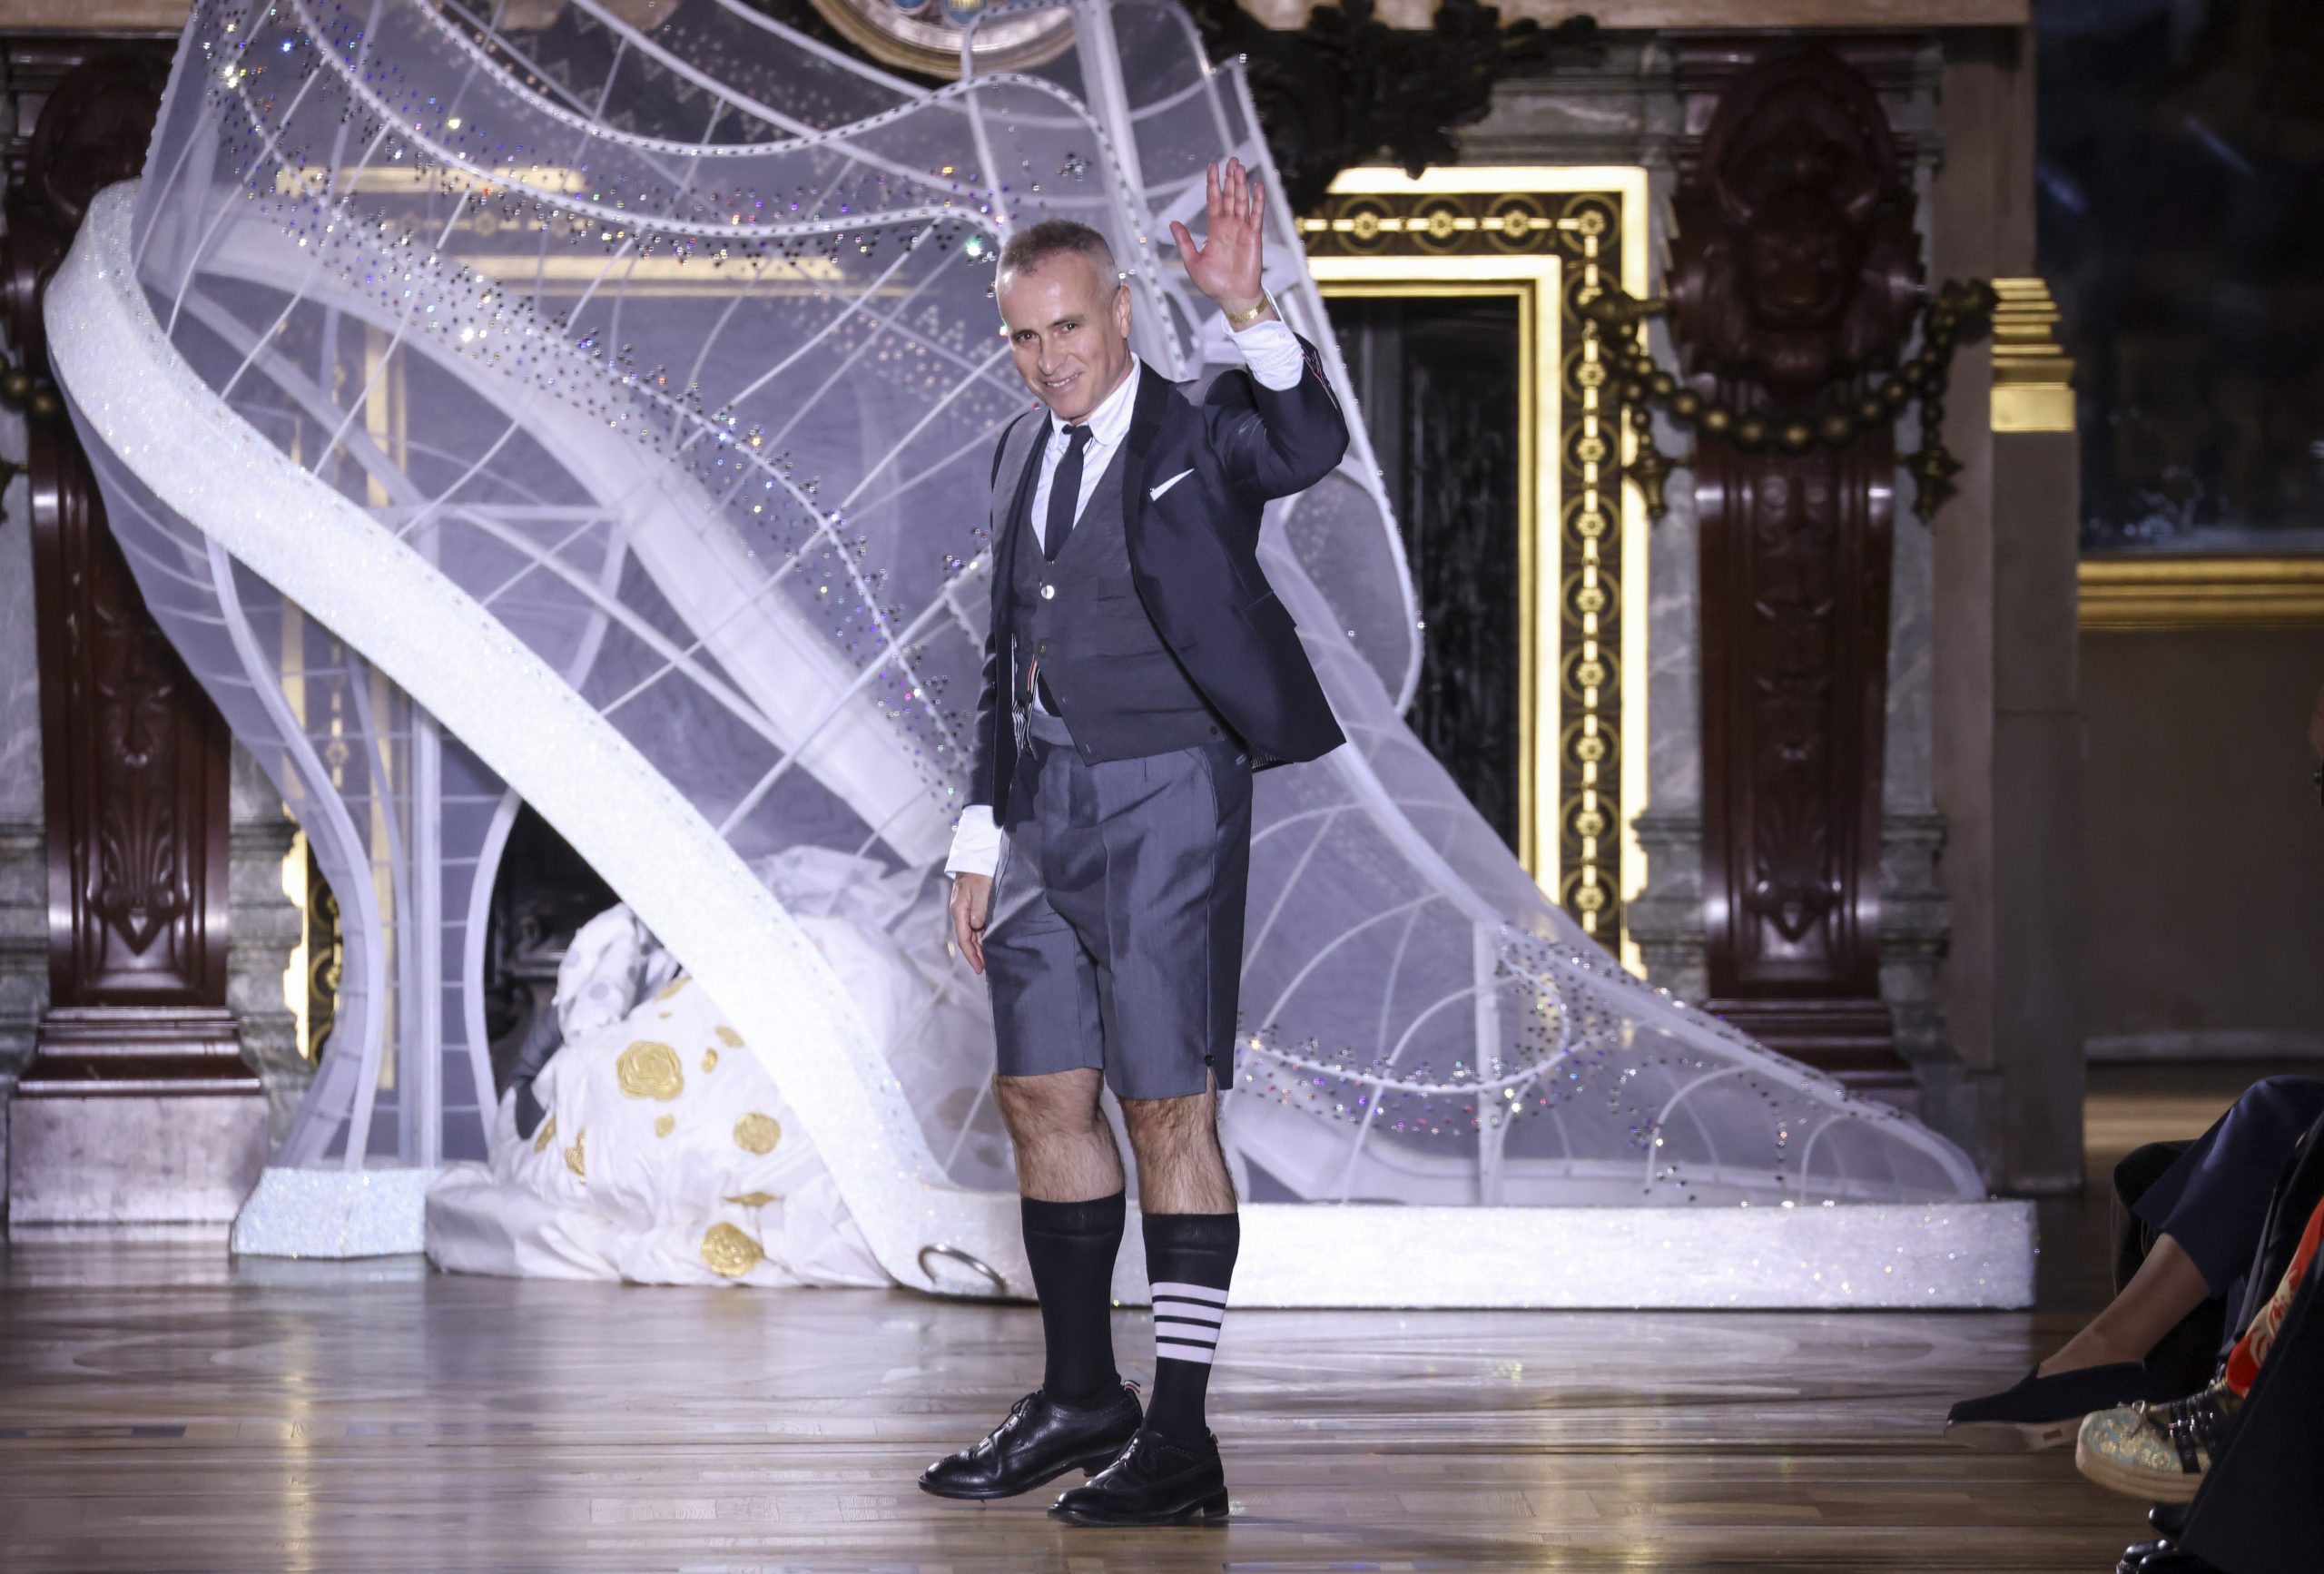 Thom Browne wins lawsuit against Adidas over use of stripes